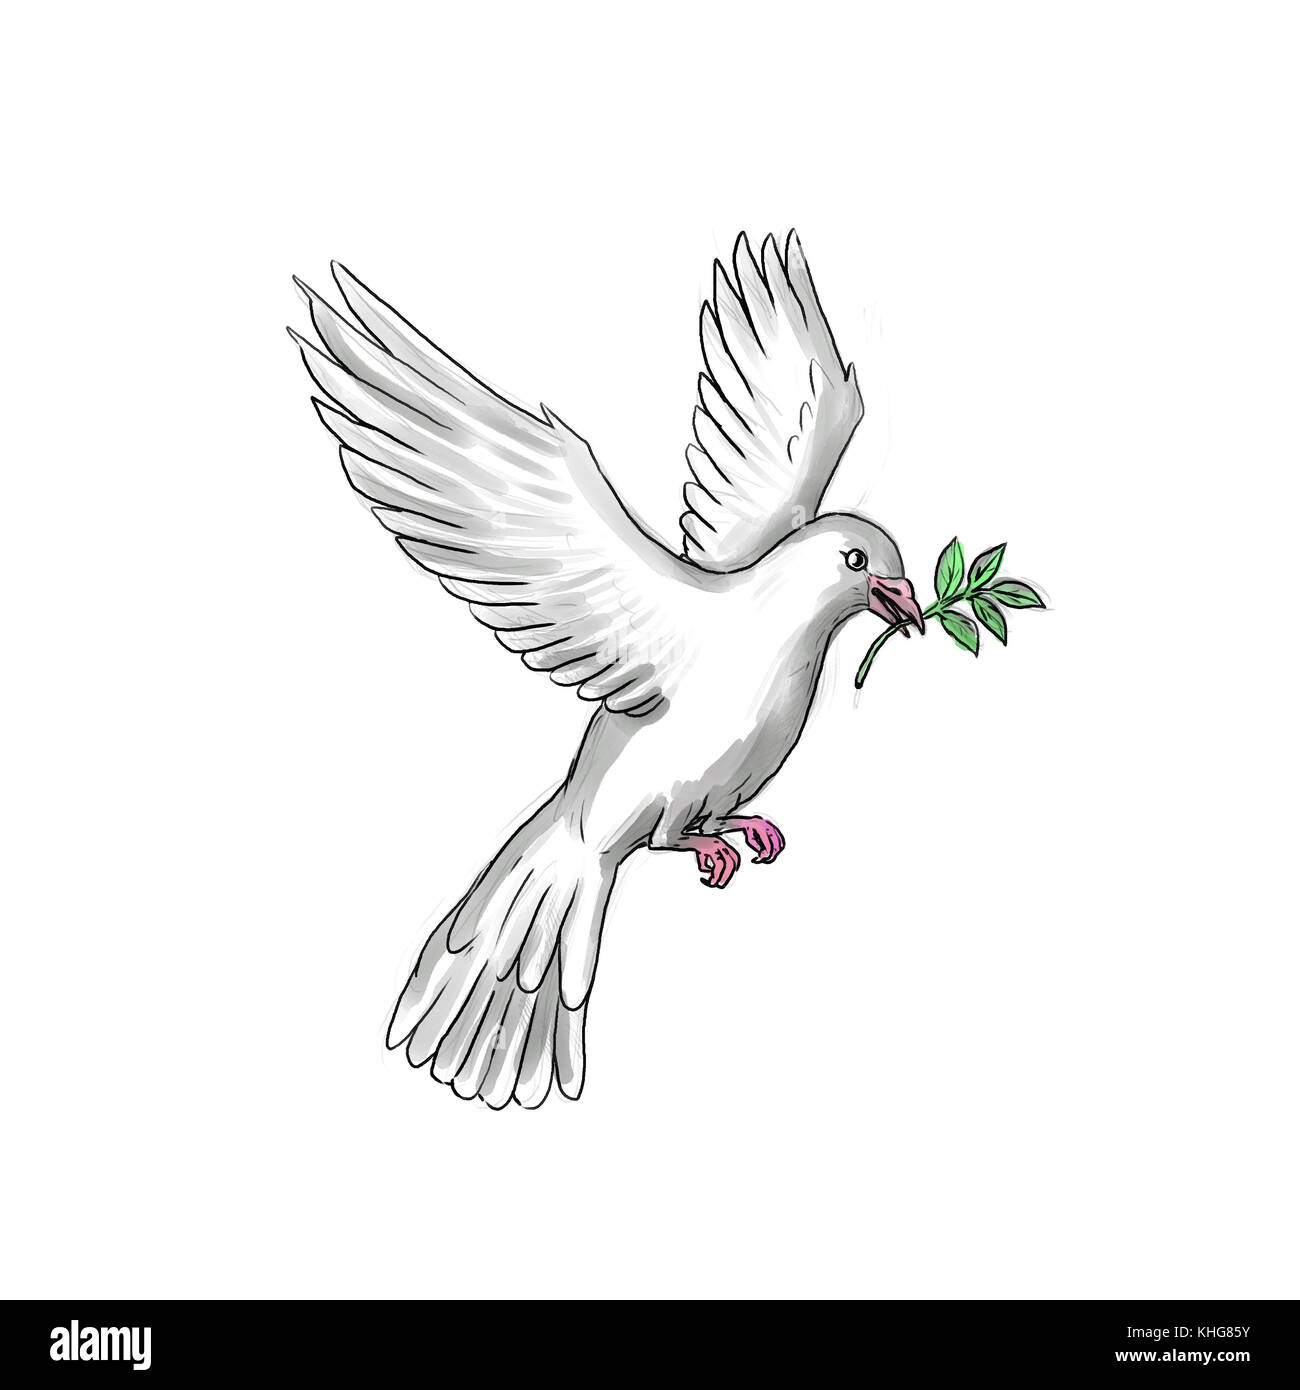 Tattoo style illustration of a dove or pigeon flying with olive branch. Stock Photo